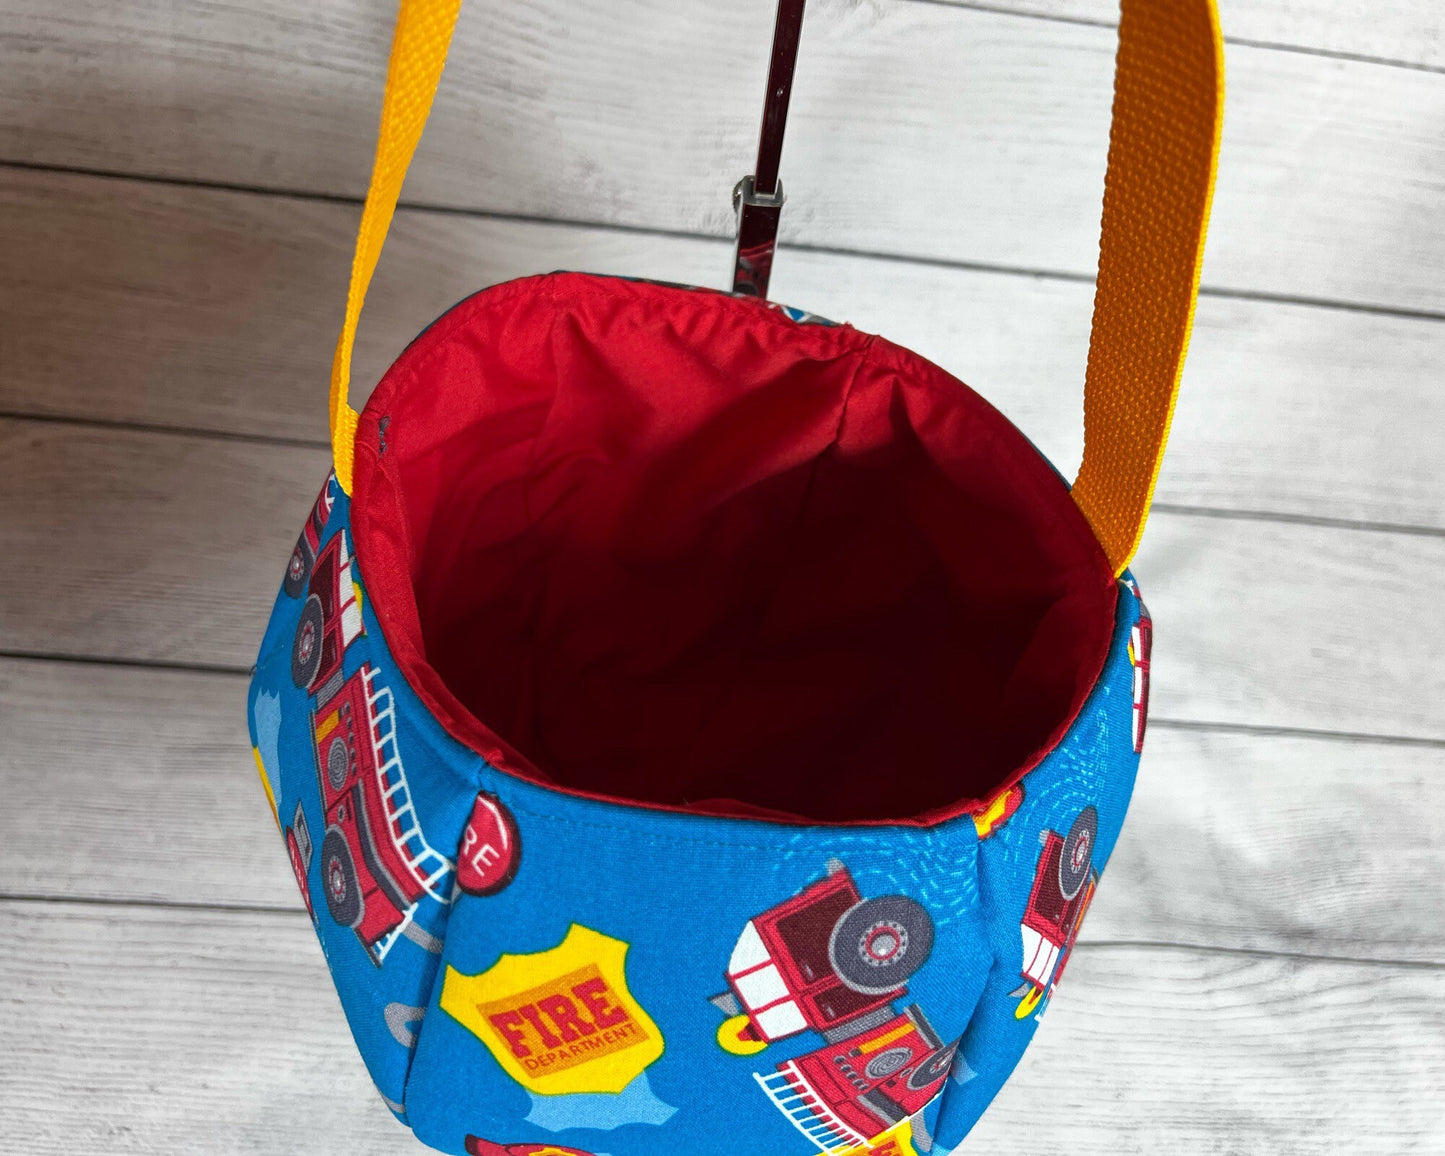 Fire Truck Bag - Tote - Red - Fire Department - Fire Hat - Ladder - Water - Gift - Everyday - Holiday - Easter - Halloween - Party